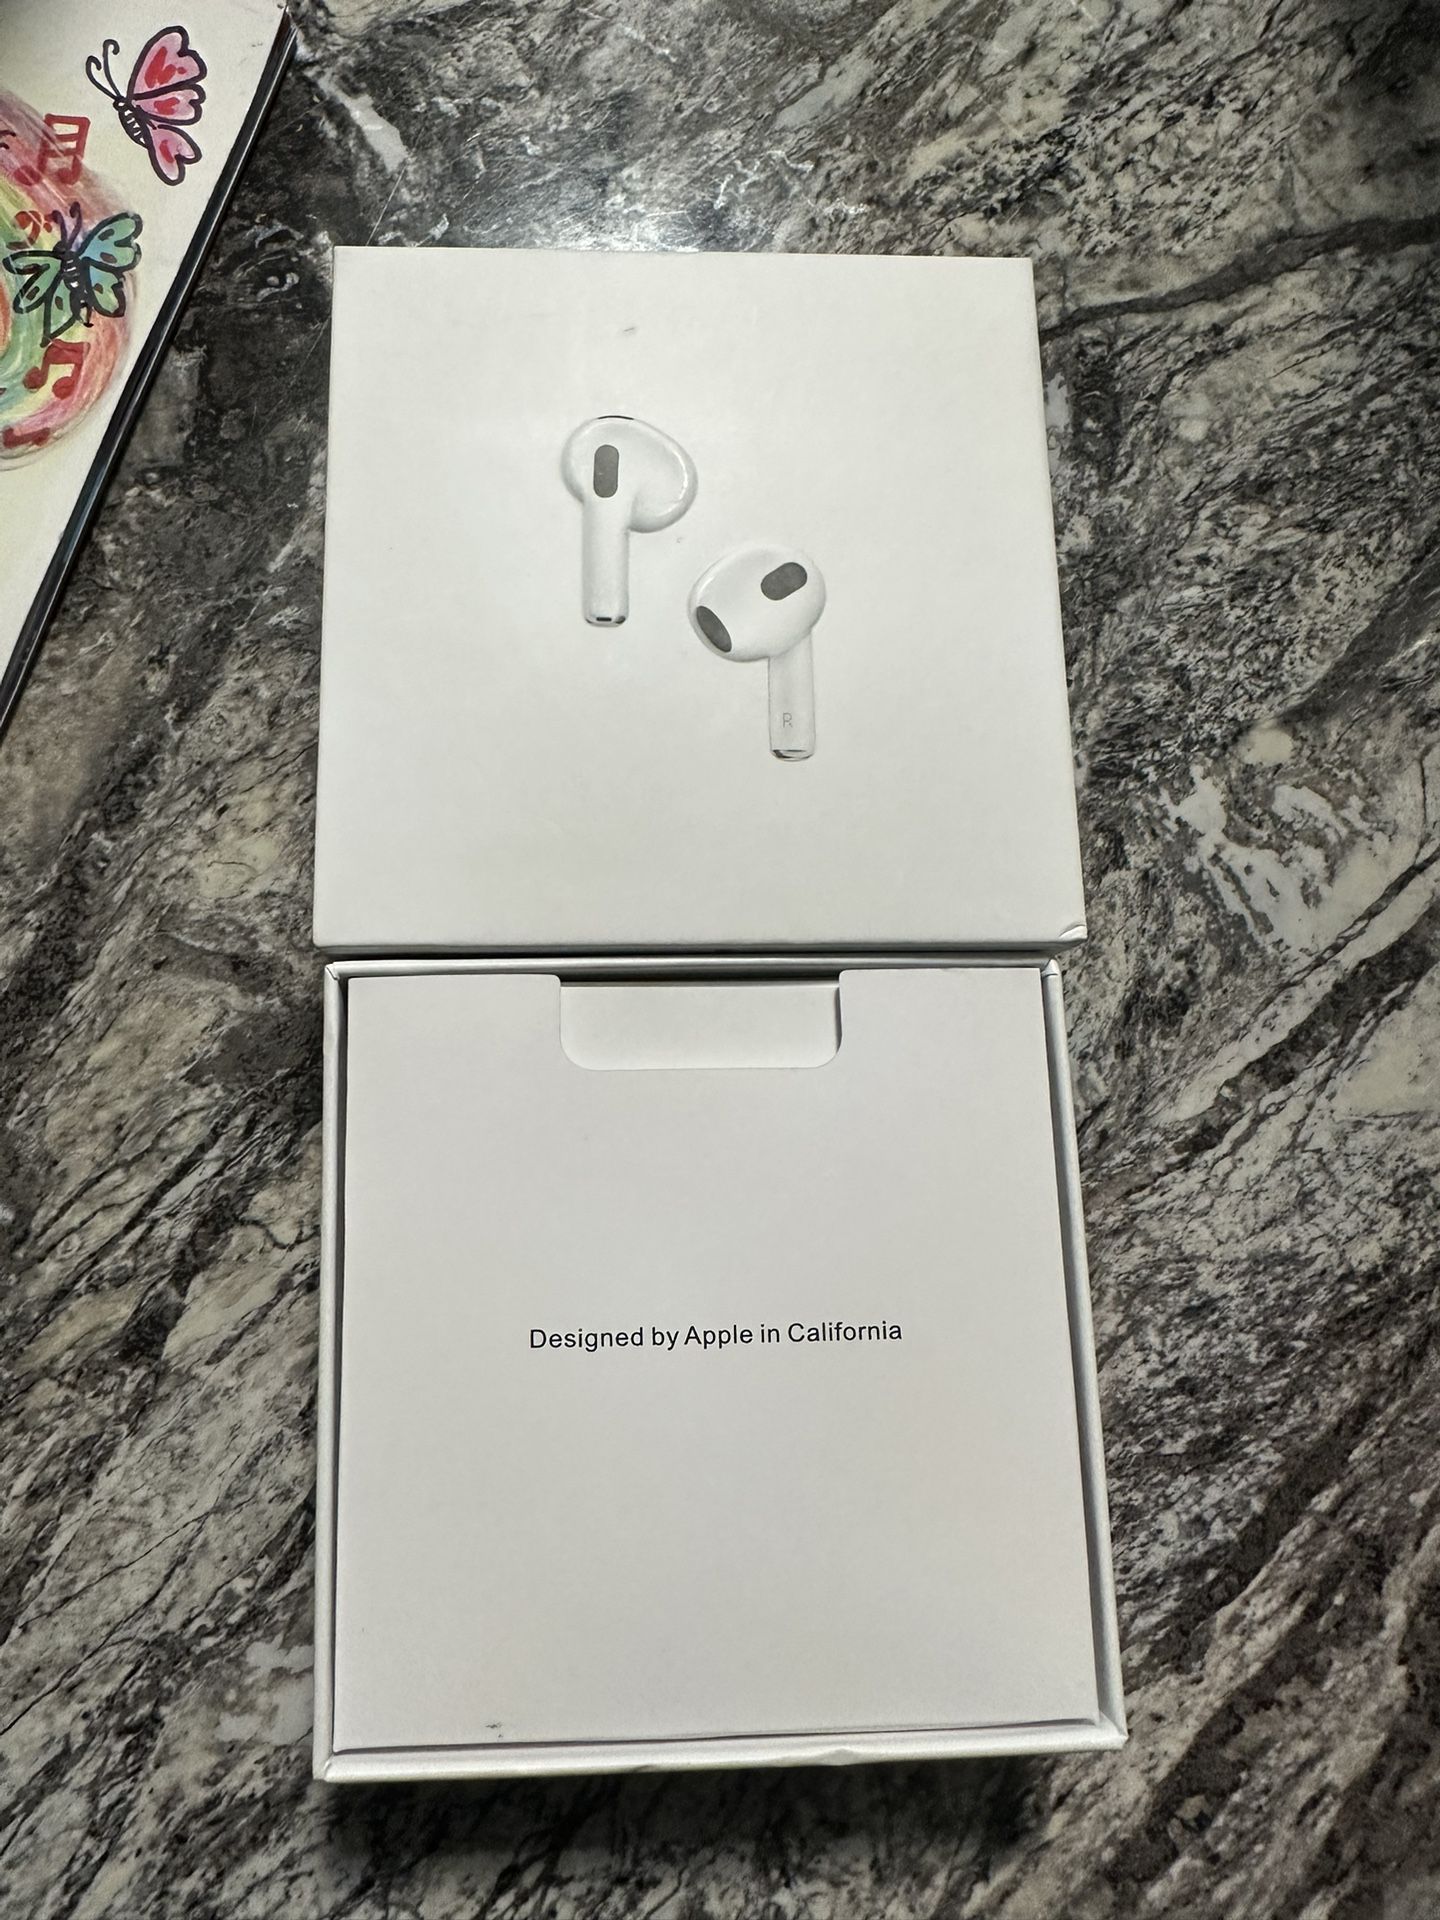 New Never Used AirPods 3rd Generation 